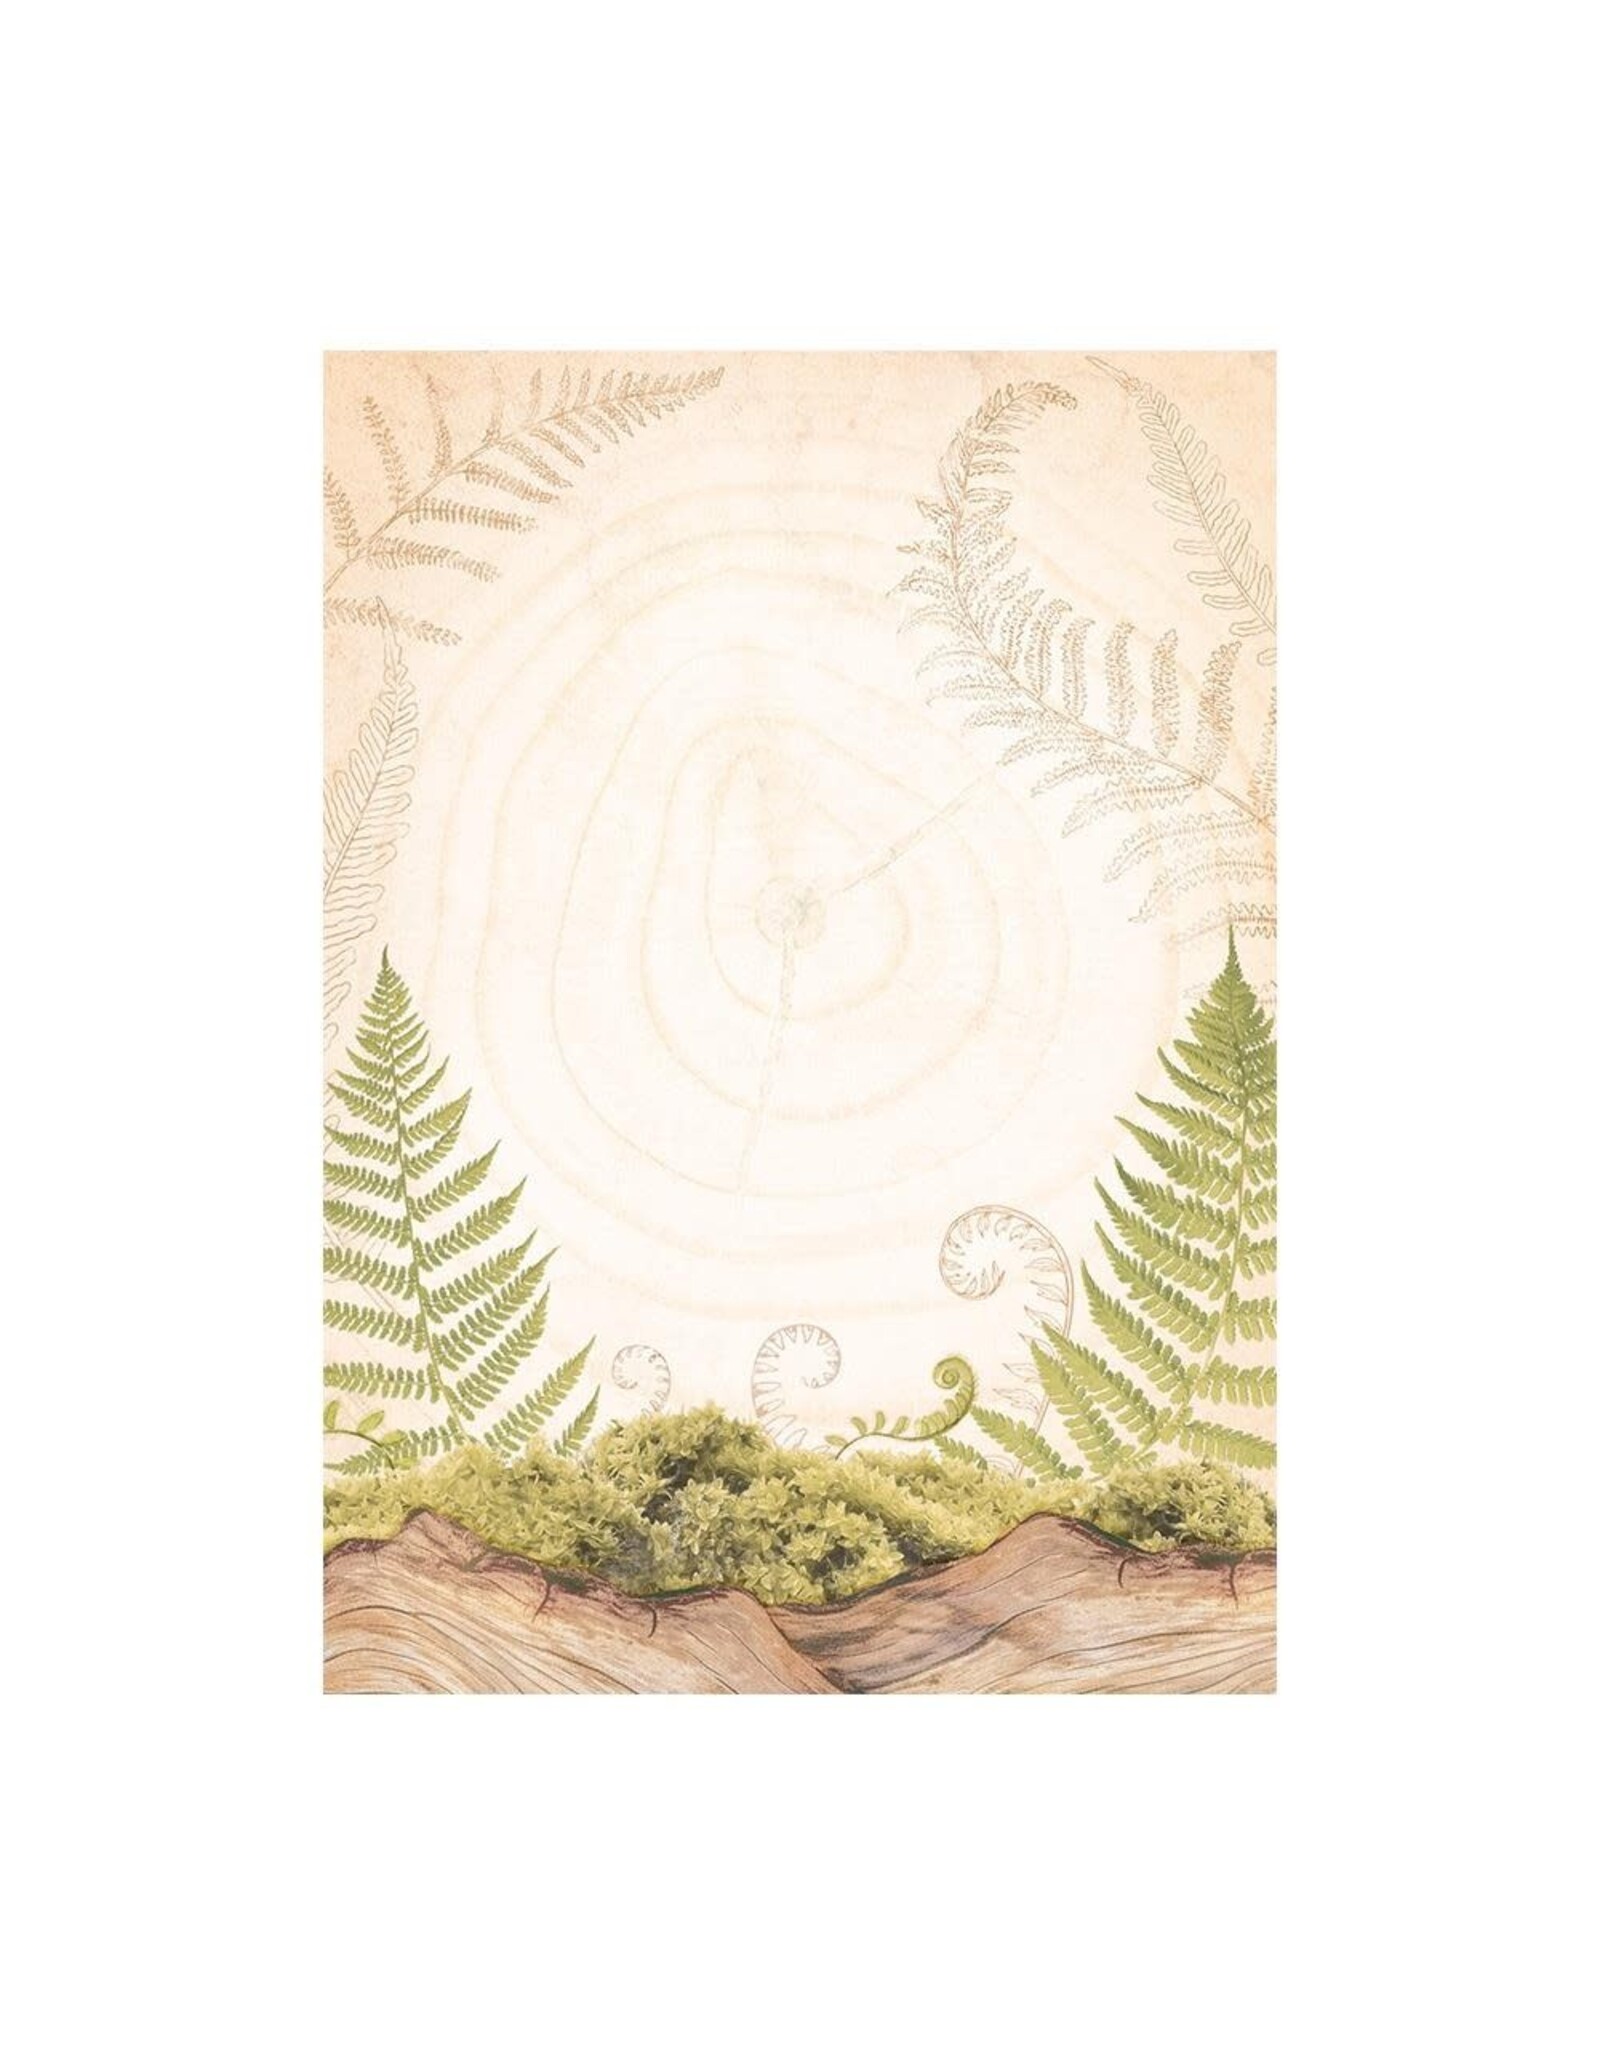 STAMPERIA STAMPERIA WOODLAND ASSORTED A6 RICE PAPER DECOUPAGE BACKGROUNDS 10.5X14.8CM 8/PK